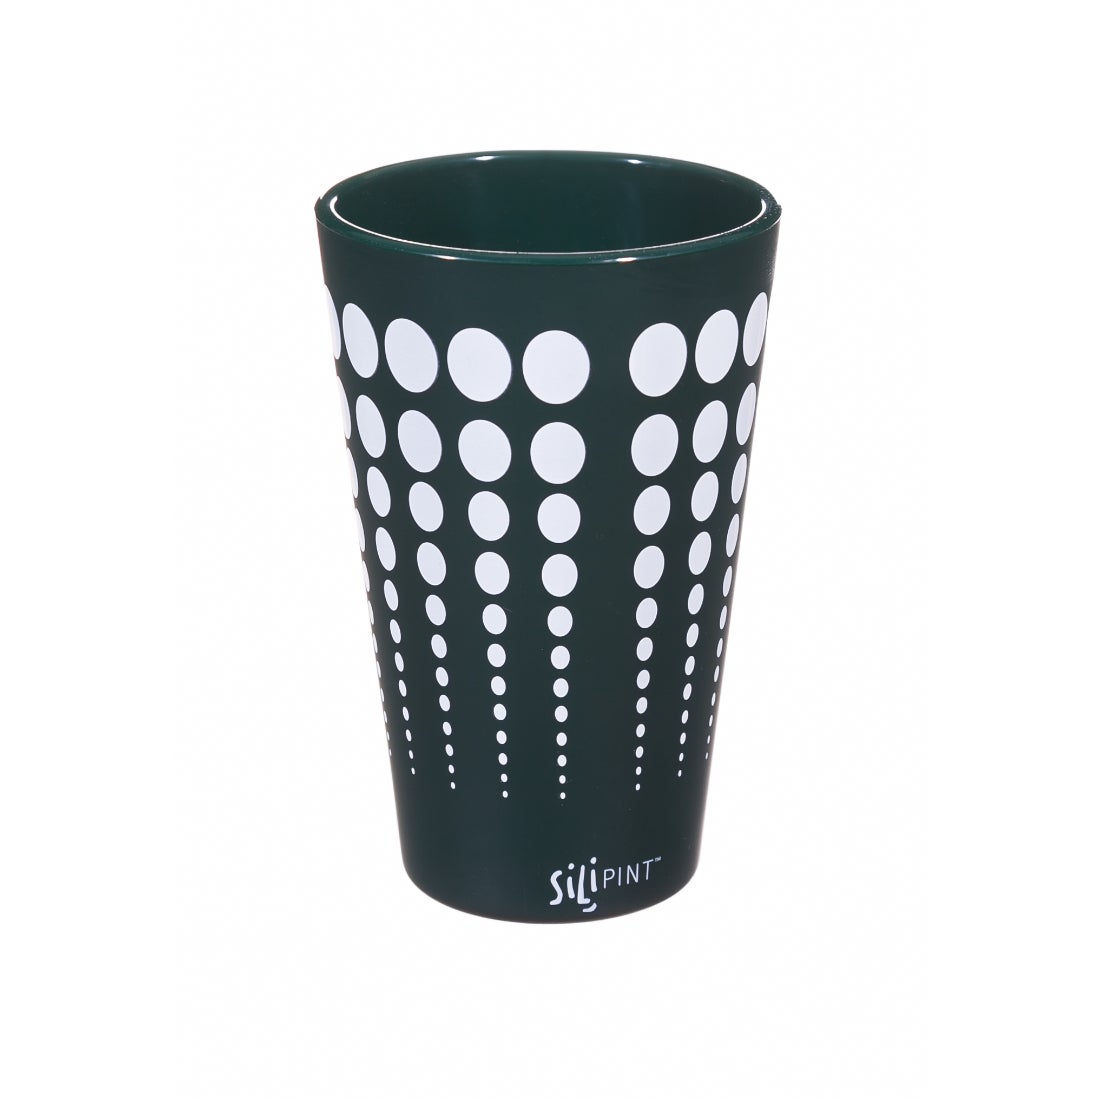 Cypress Home Dark Green with White Dots Unbreakable Silicone Pint Glass, 16 ounces